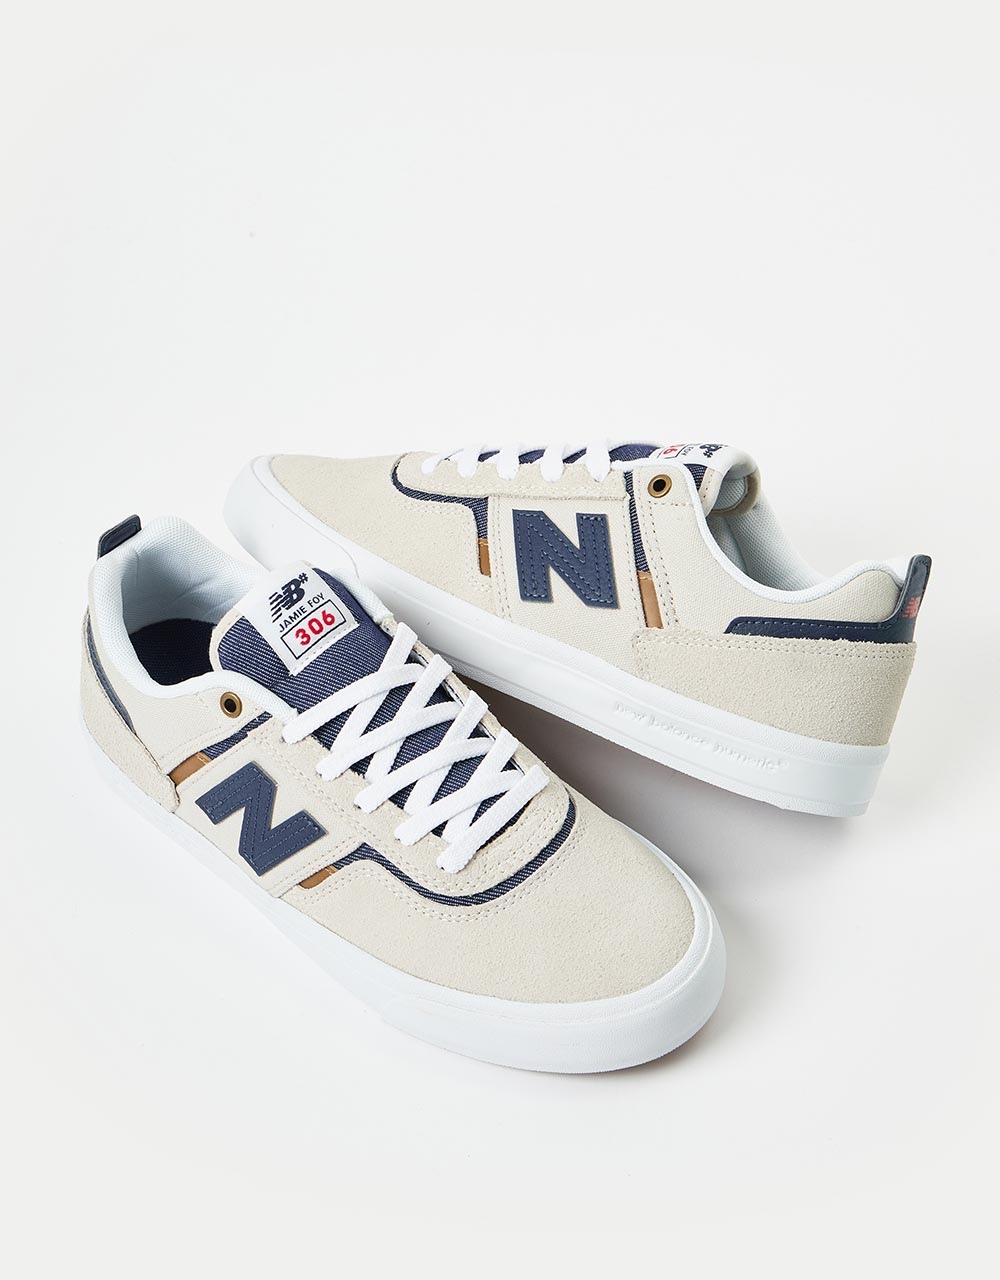 New Balance Numeric 306 Skate Shoes - Sea Salt/Navy – Route One